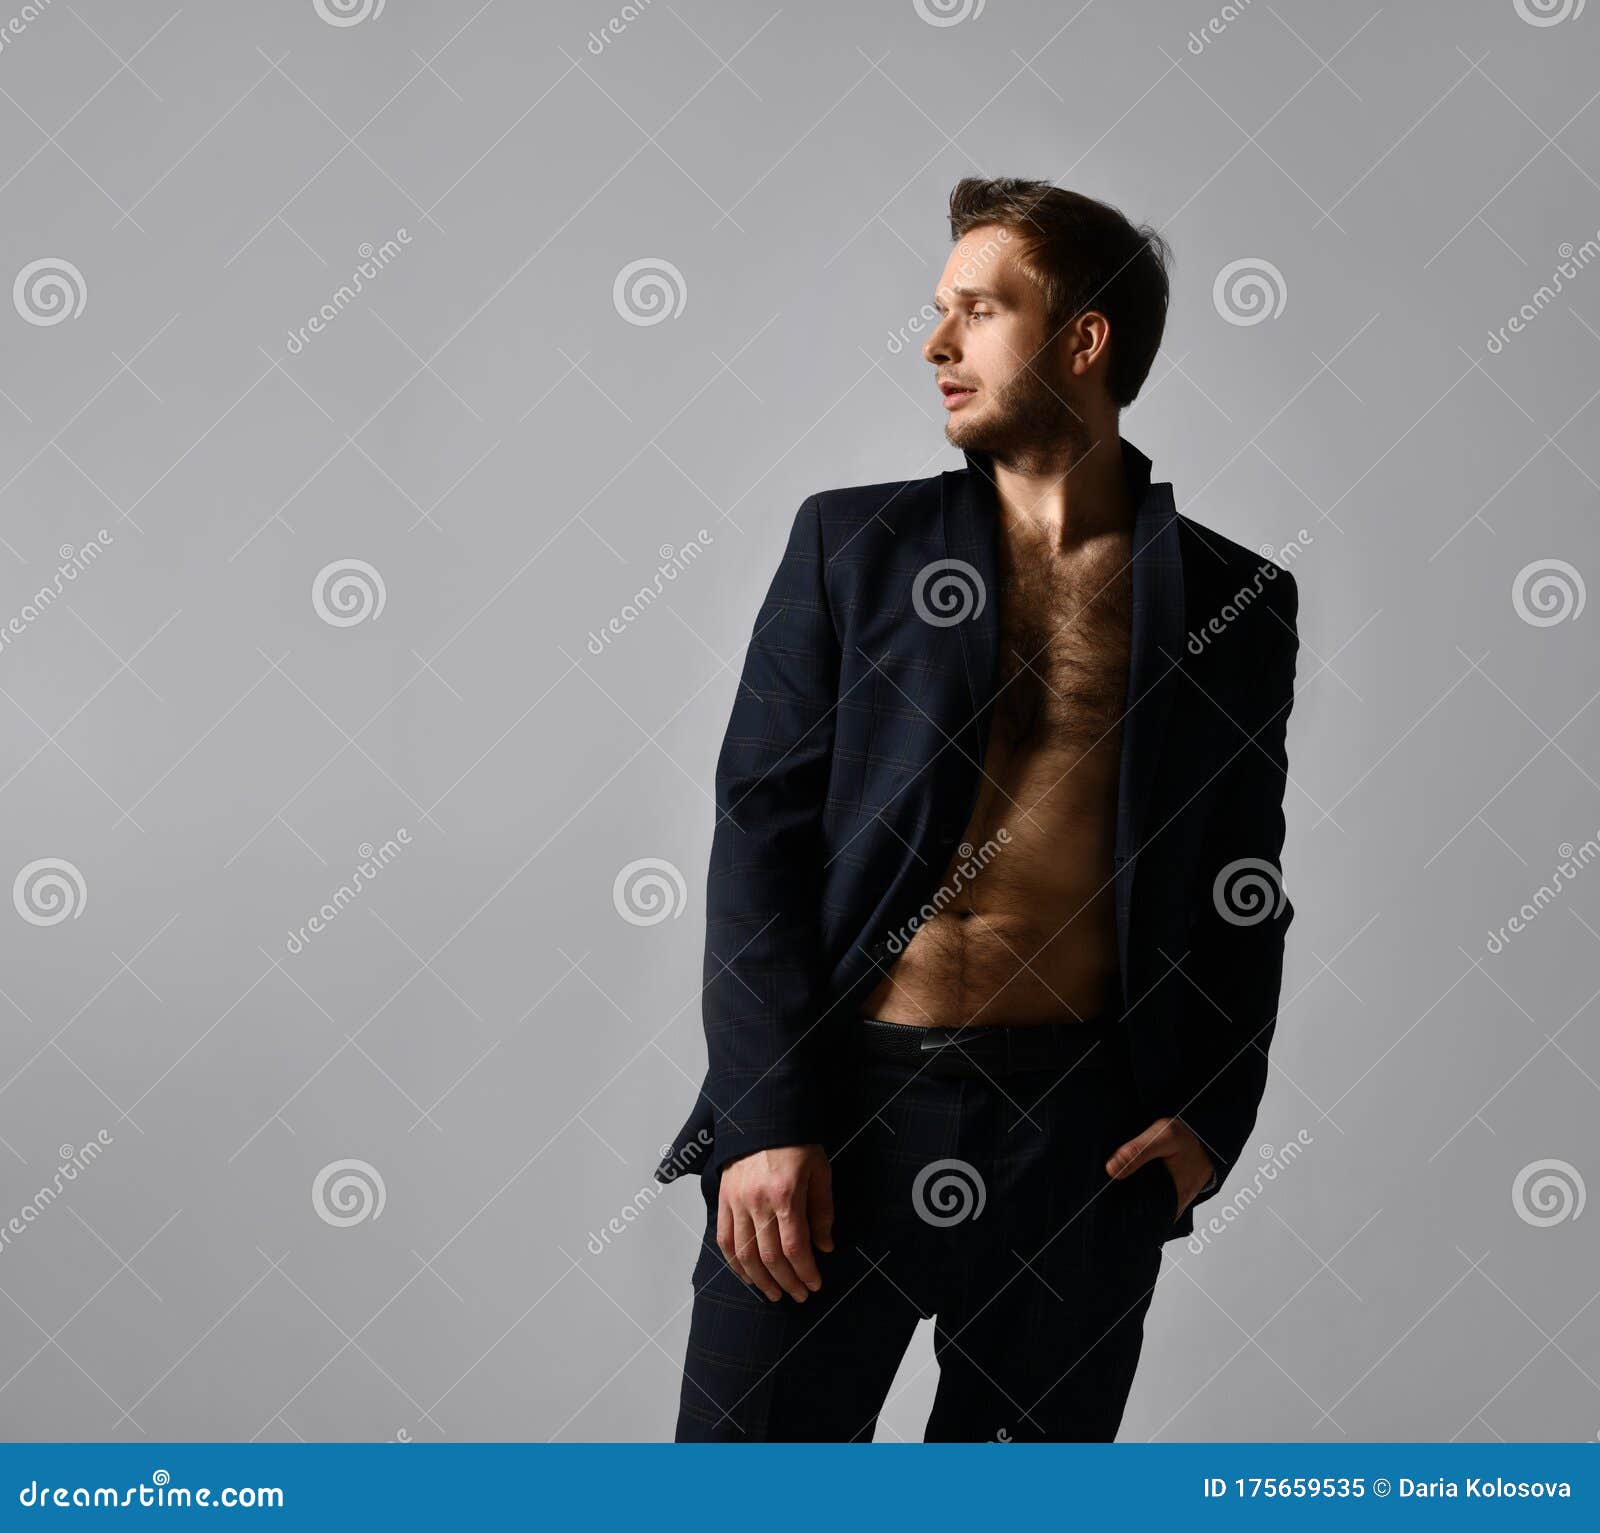 Handsome Man in Black Classic Suit on Naked Body. he is Straightening His  Jacket, Posing Against Gray Background. Close Up Stock Image - Image of  body, gray: 175659535